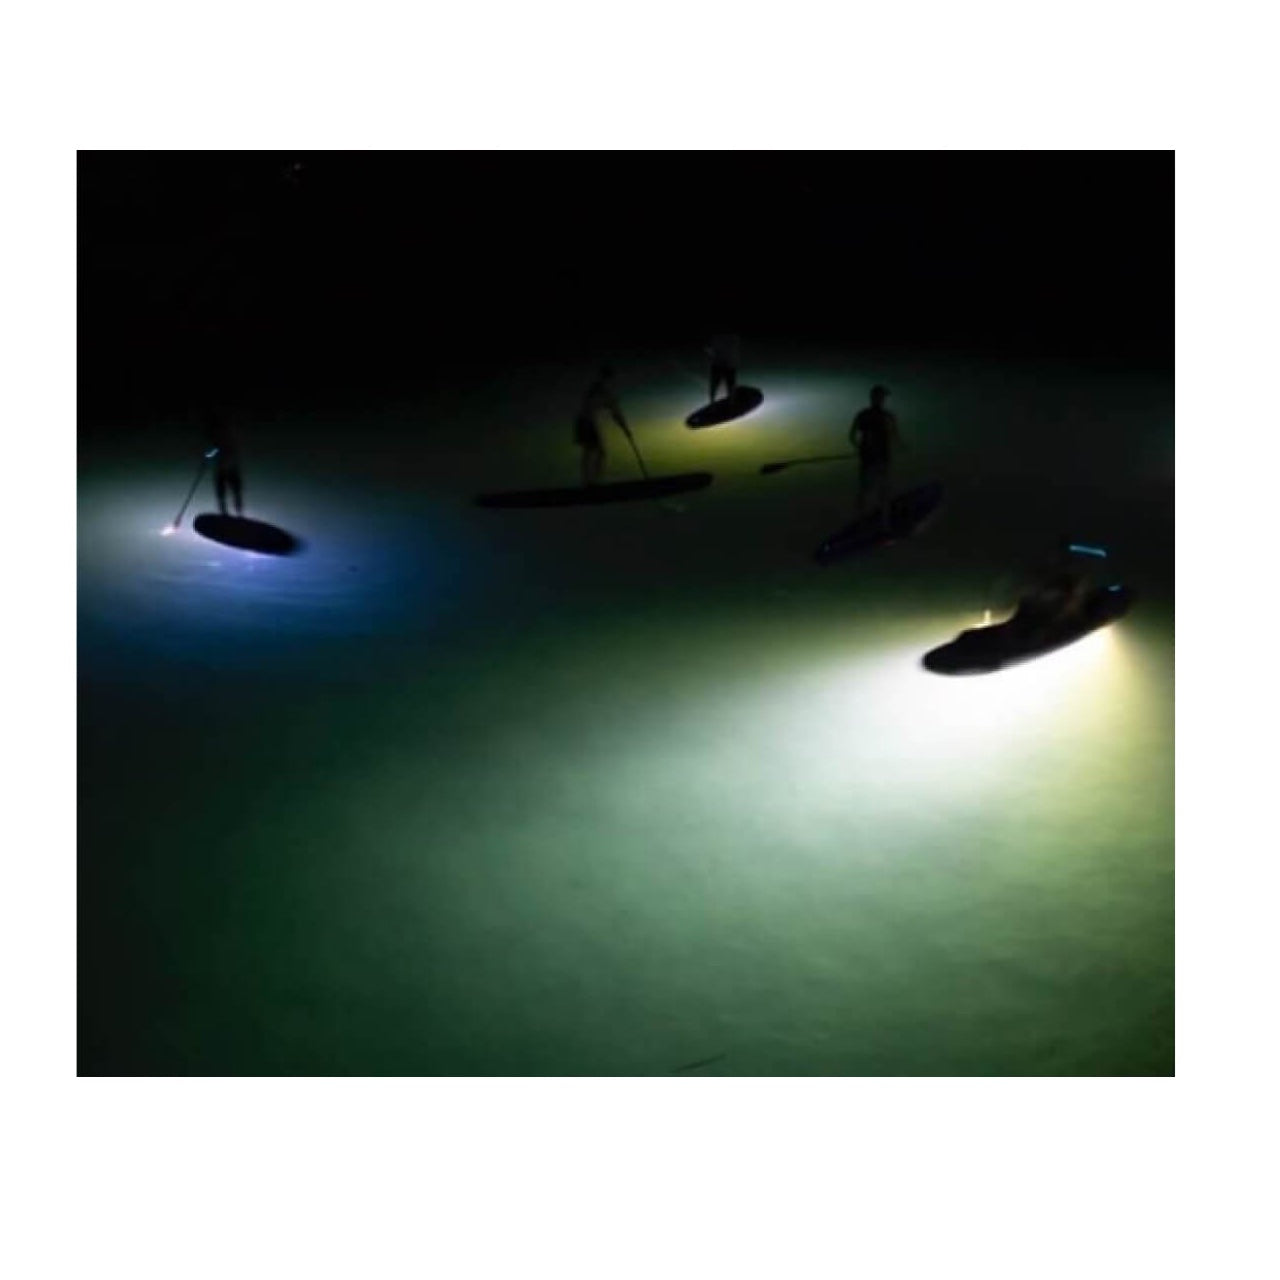 Paddle boarders use the ScubaJet Pro as a paddleboard motor with the BEAM kit. The area below their boards is lit up by the powerful light.